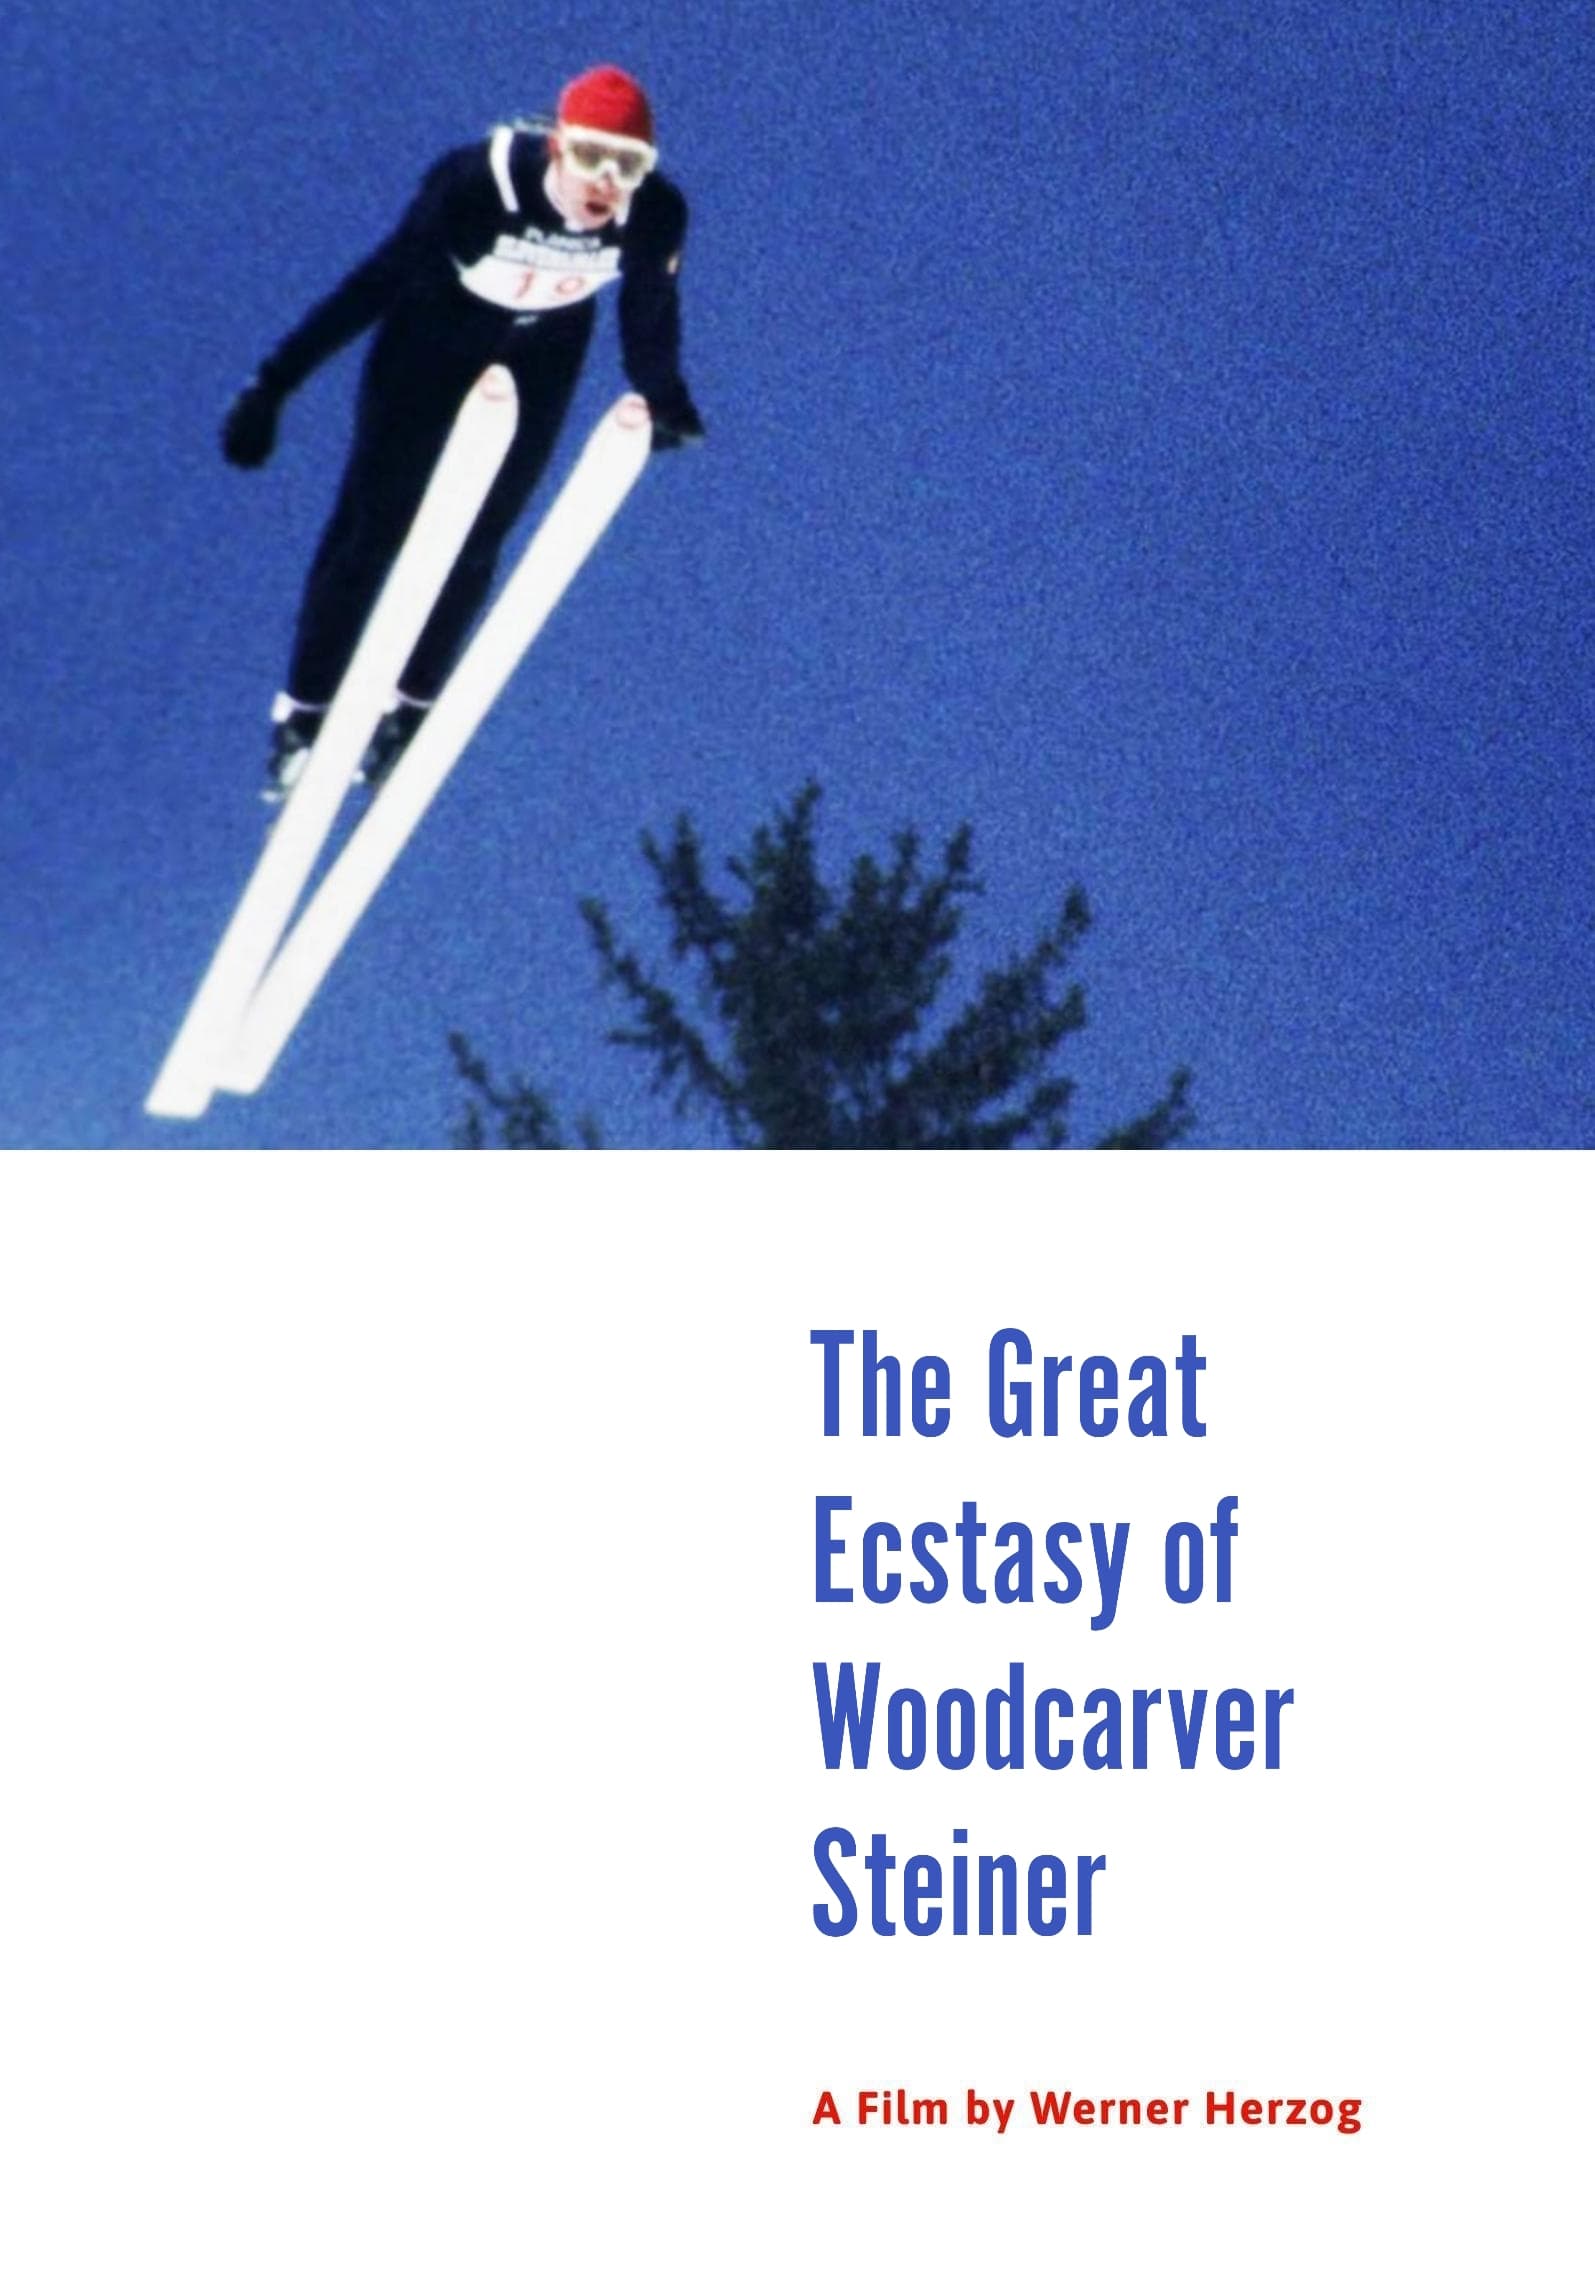 The Great Ecstasy of Woodcarver Steiner (1974)